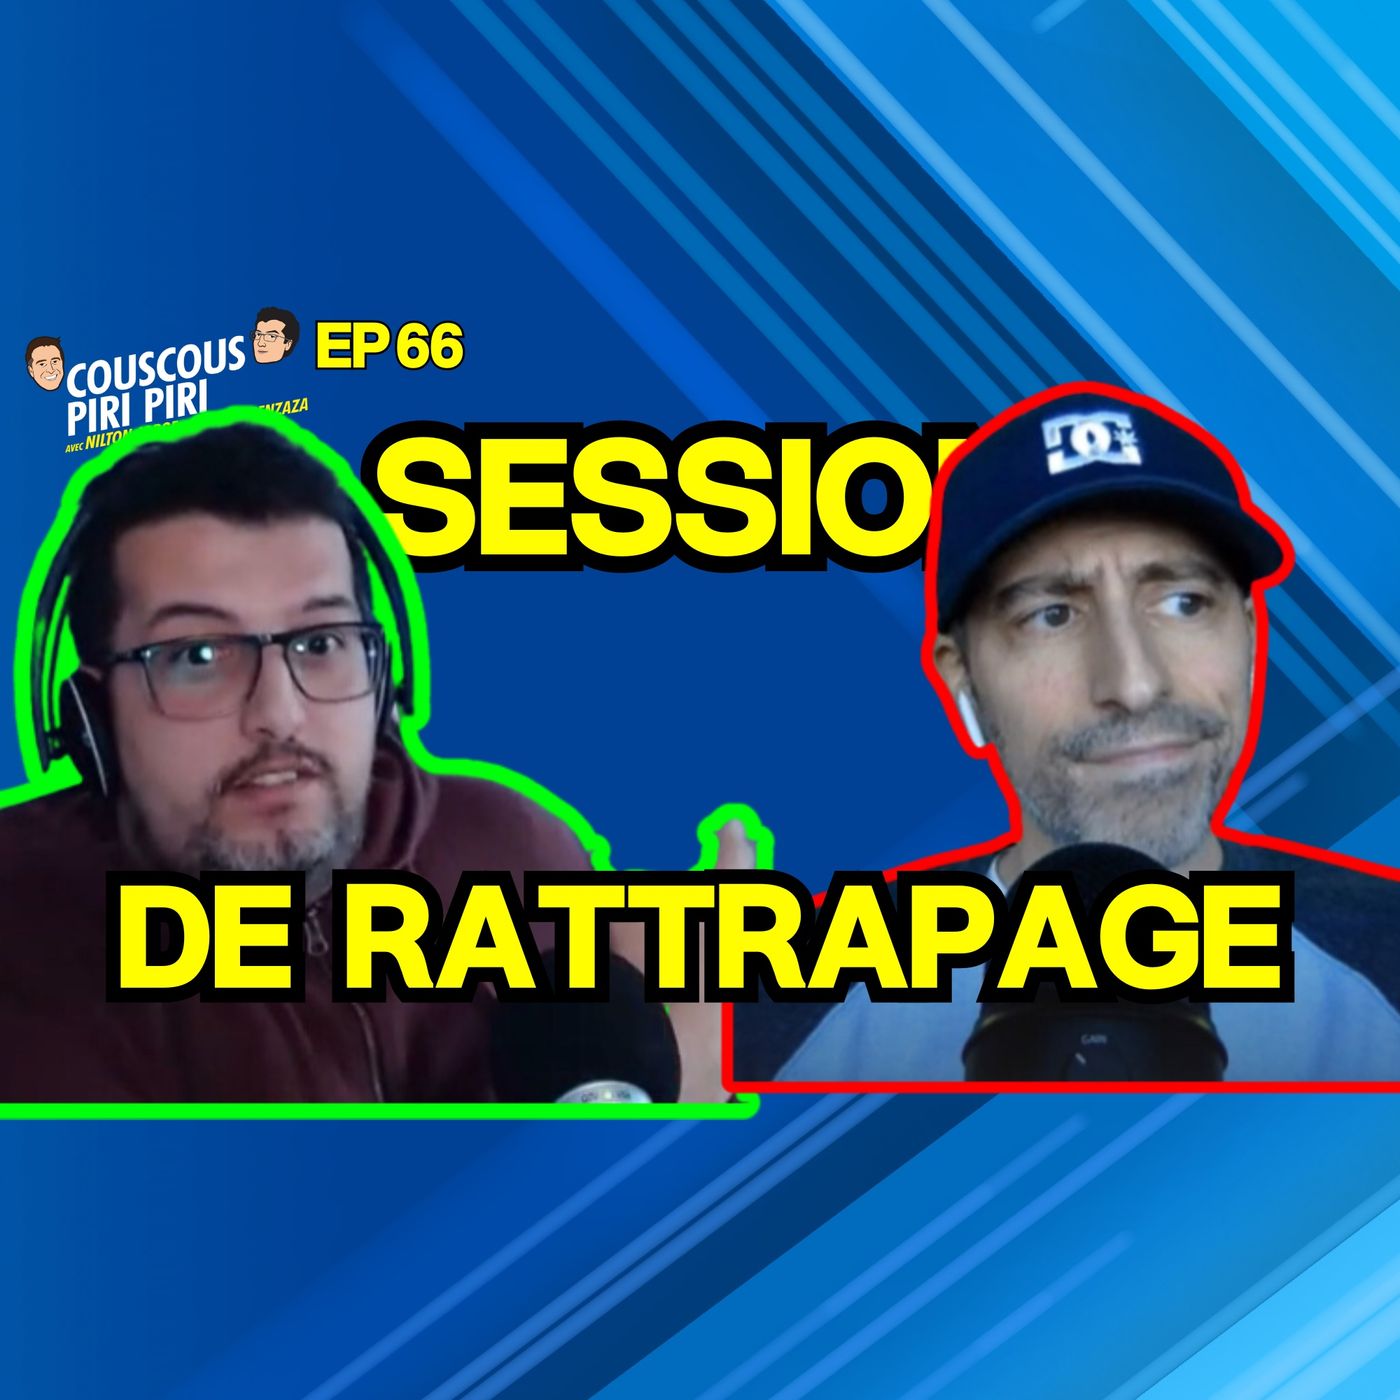 Session de rattrapage | CCPP Ep 67